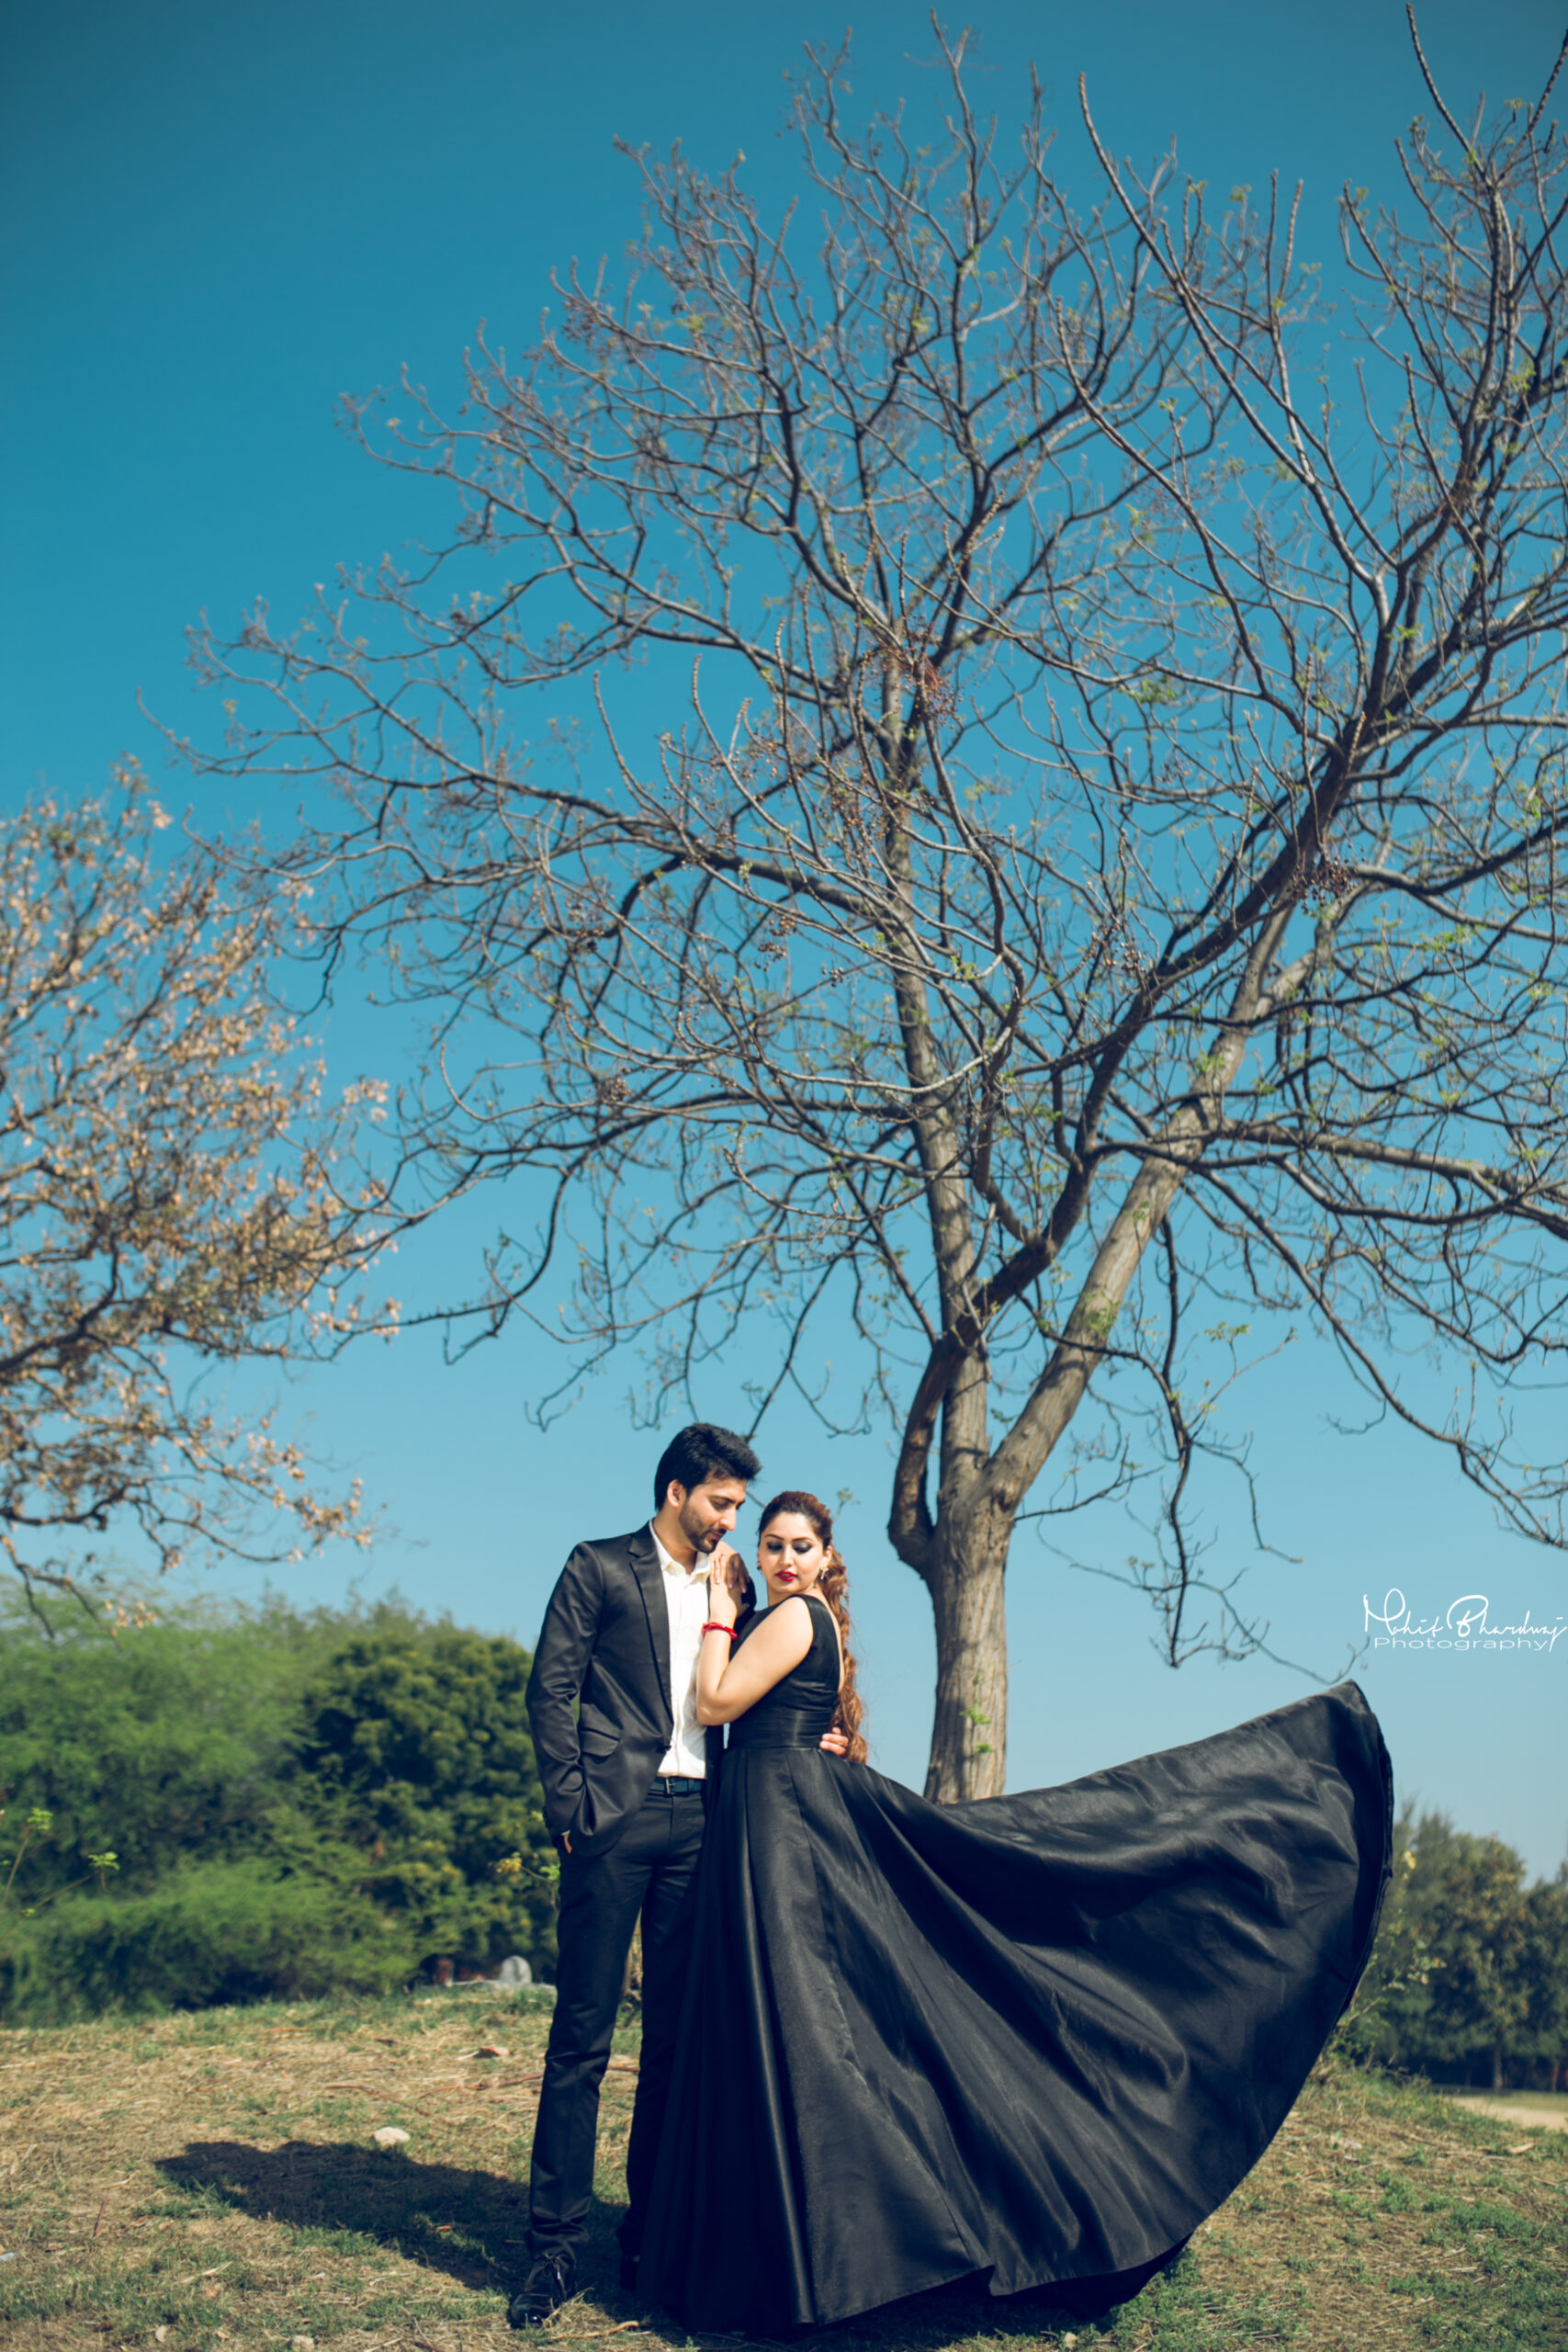 20 Amazing Couple Poses and Ideas for Your Next Photoshoot